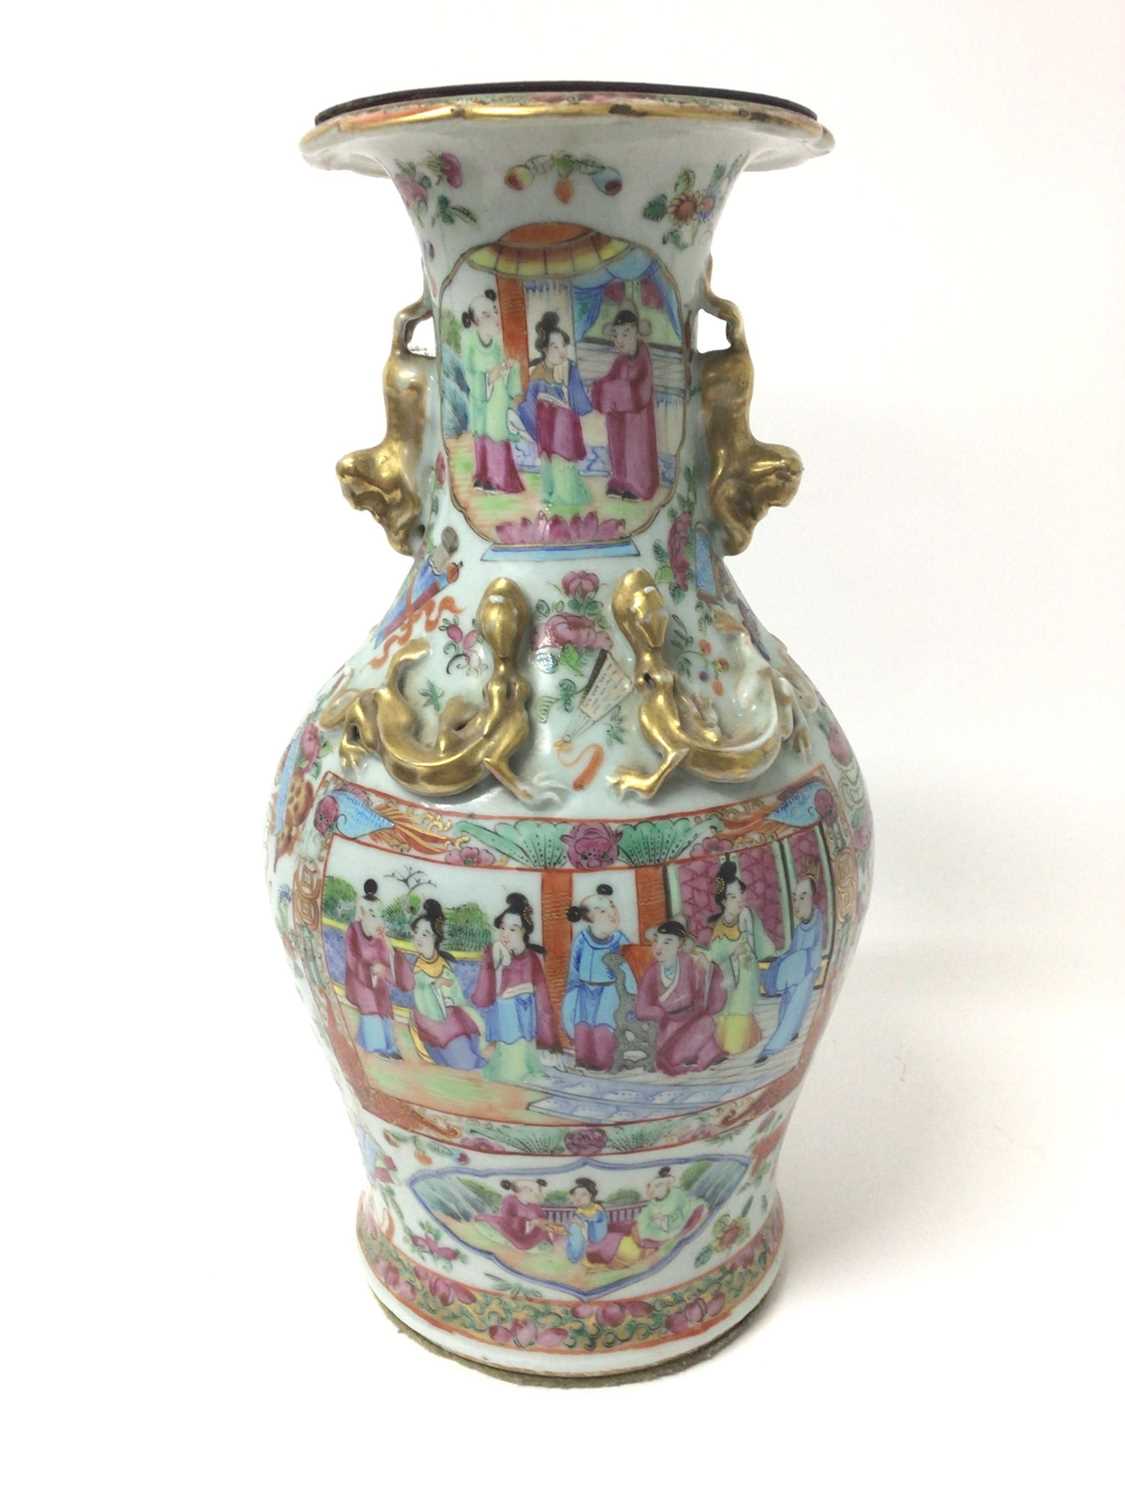 Lot 12 - 19th century Chinese Canton famille rose baluster vase, converted to a lamp, decorated with figural panels on a ground of precious objects, flowers and insects, with foo dog handles and moulded dra...